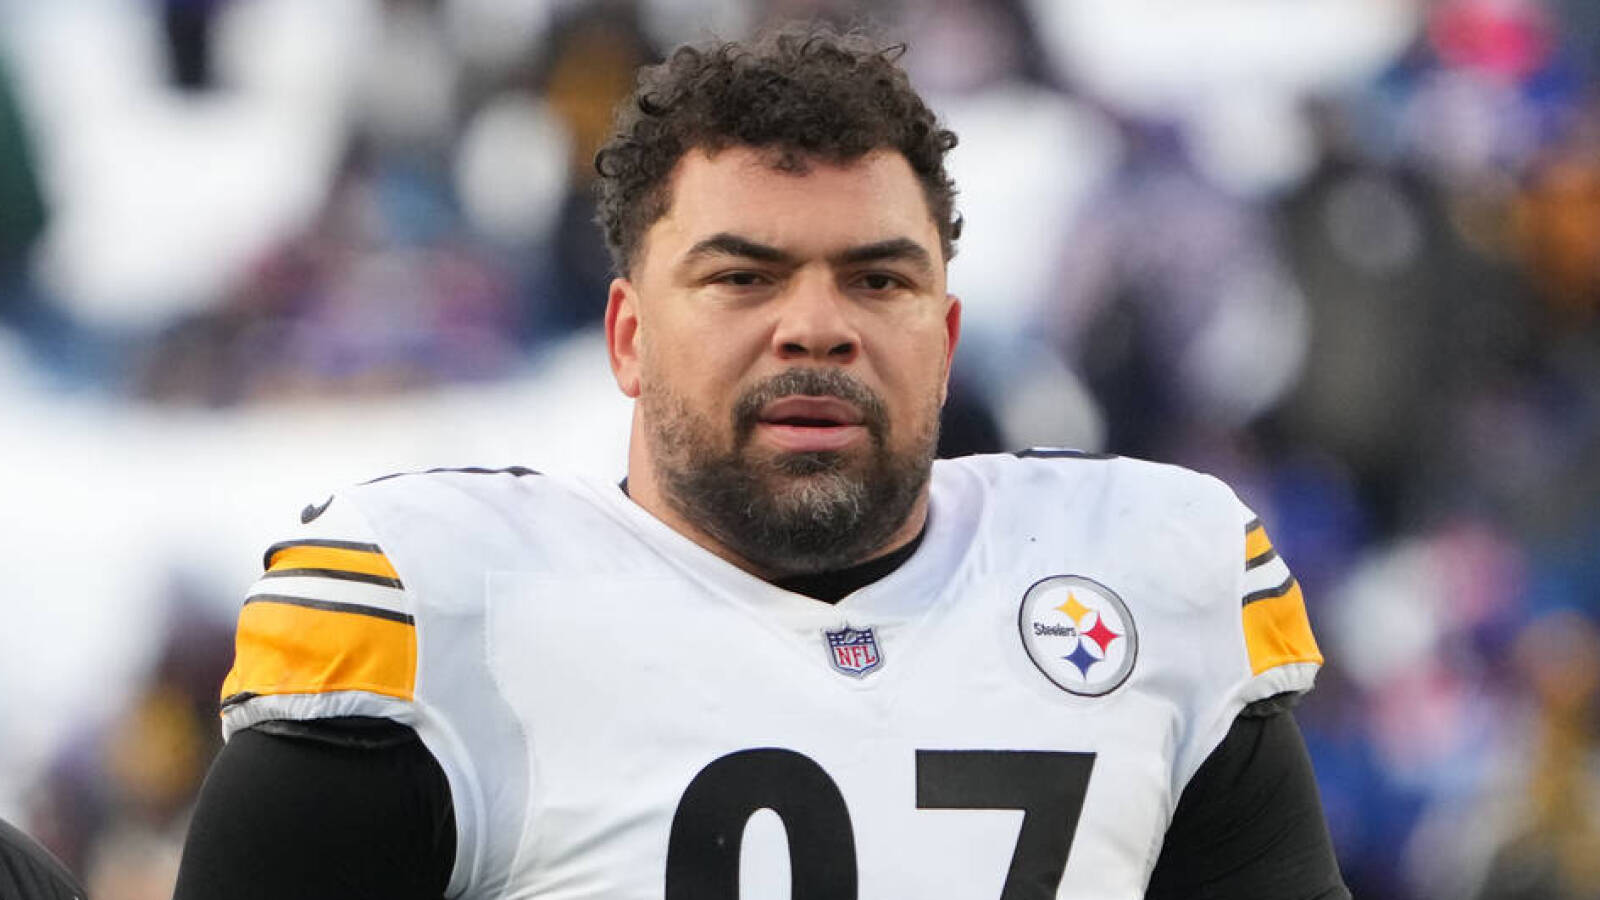 Longtime Steelers DT Cameron Heyward hints contract extension is coming